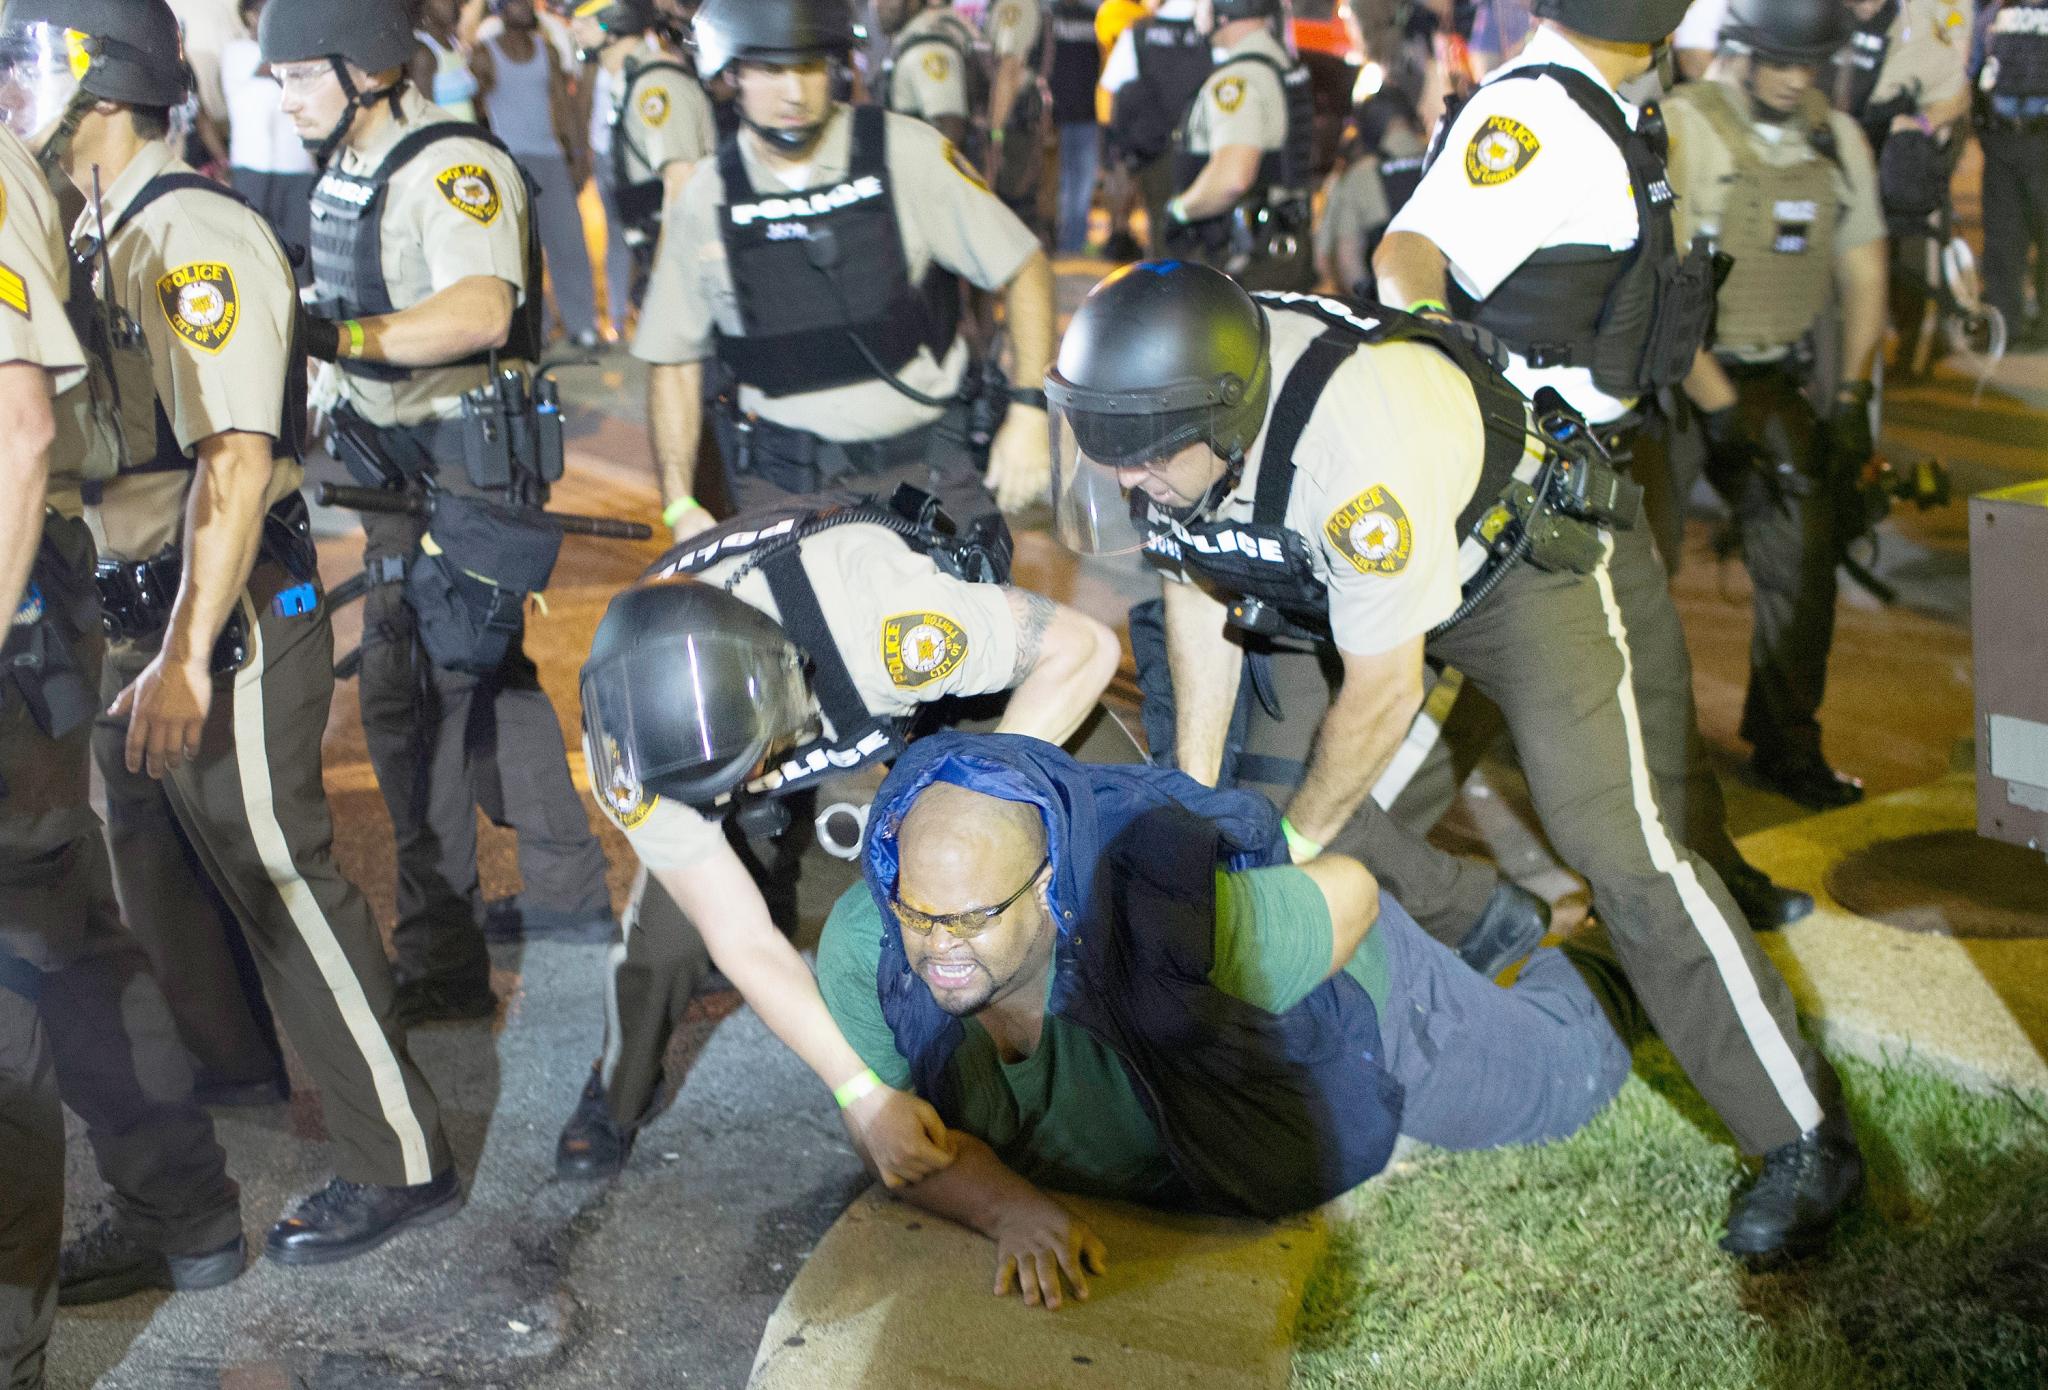 PHOTOS: 30 of the Most Captivating Images from This Week's Turbulence in Ferguson